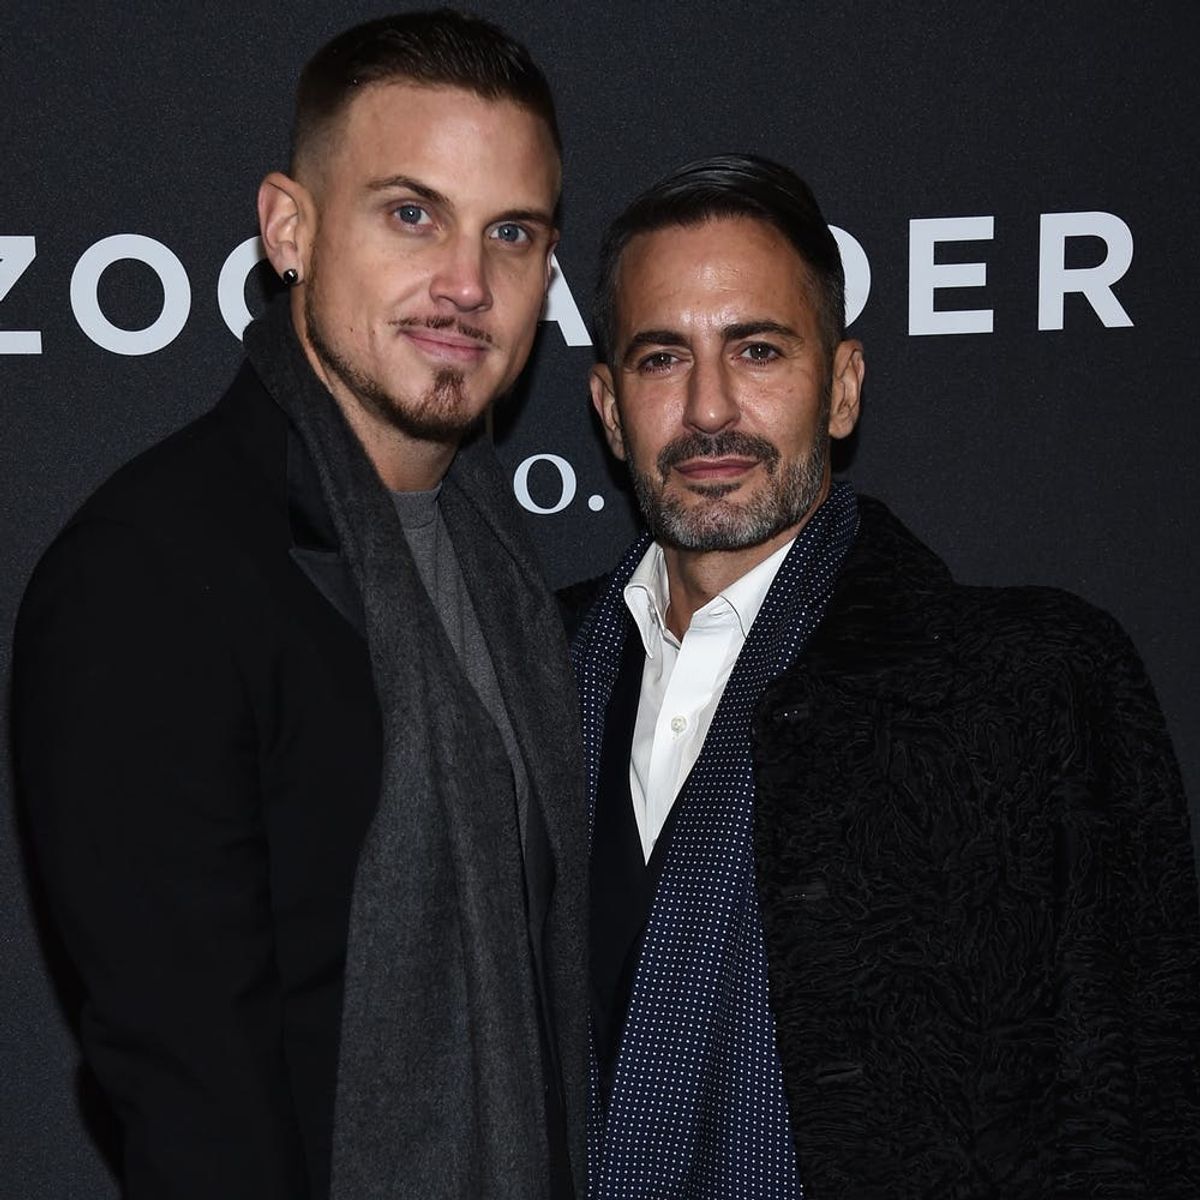 Marc Jacobs Proposed at Chipotle, So Who Says Romance Is Dead?